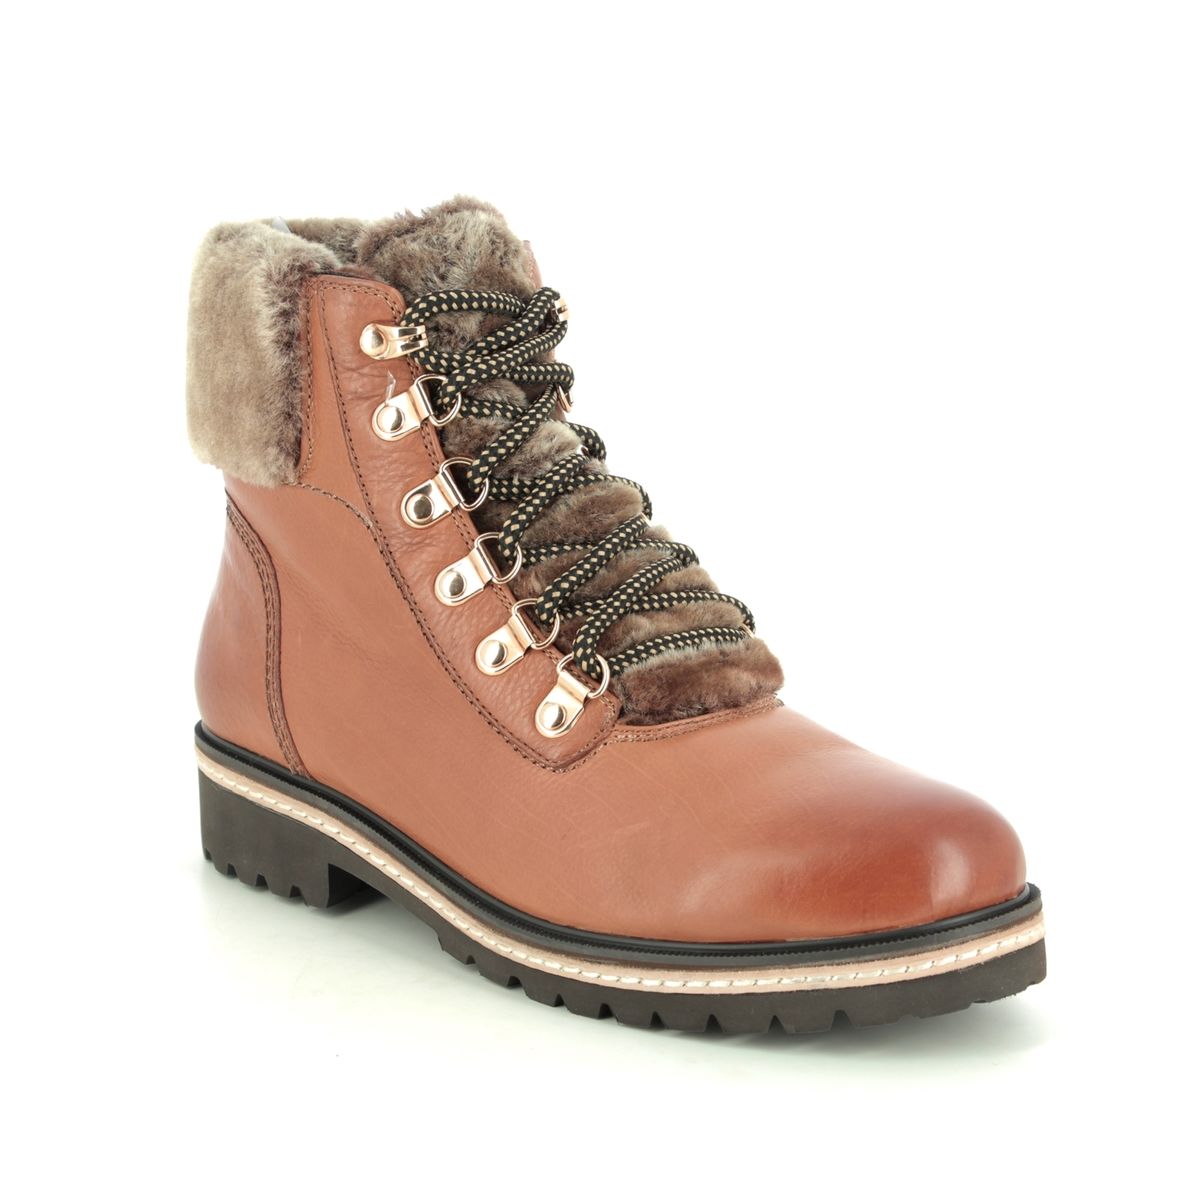 Regarde le Ciel Brandy 01 Tan Leather Womens Lace Up Boots 2046-4659 in a Plain Leather in Size 40